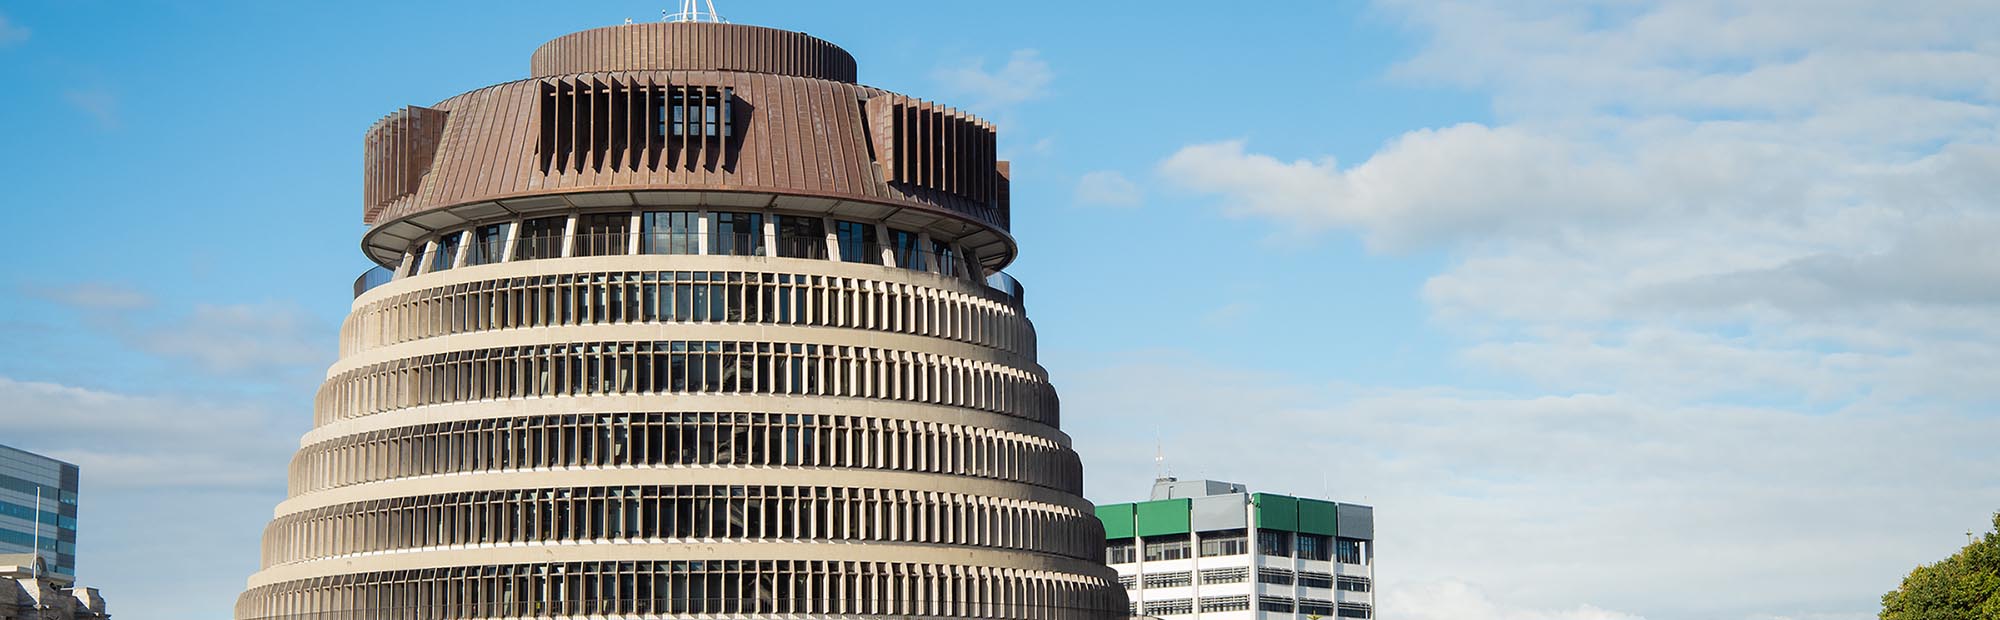 An image of parliament's Beehive building in Wellington.